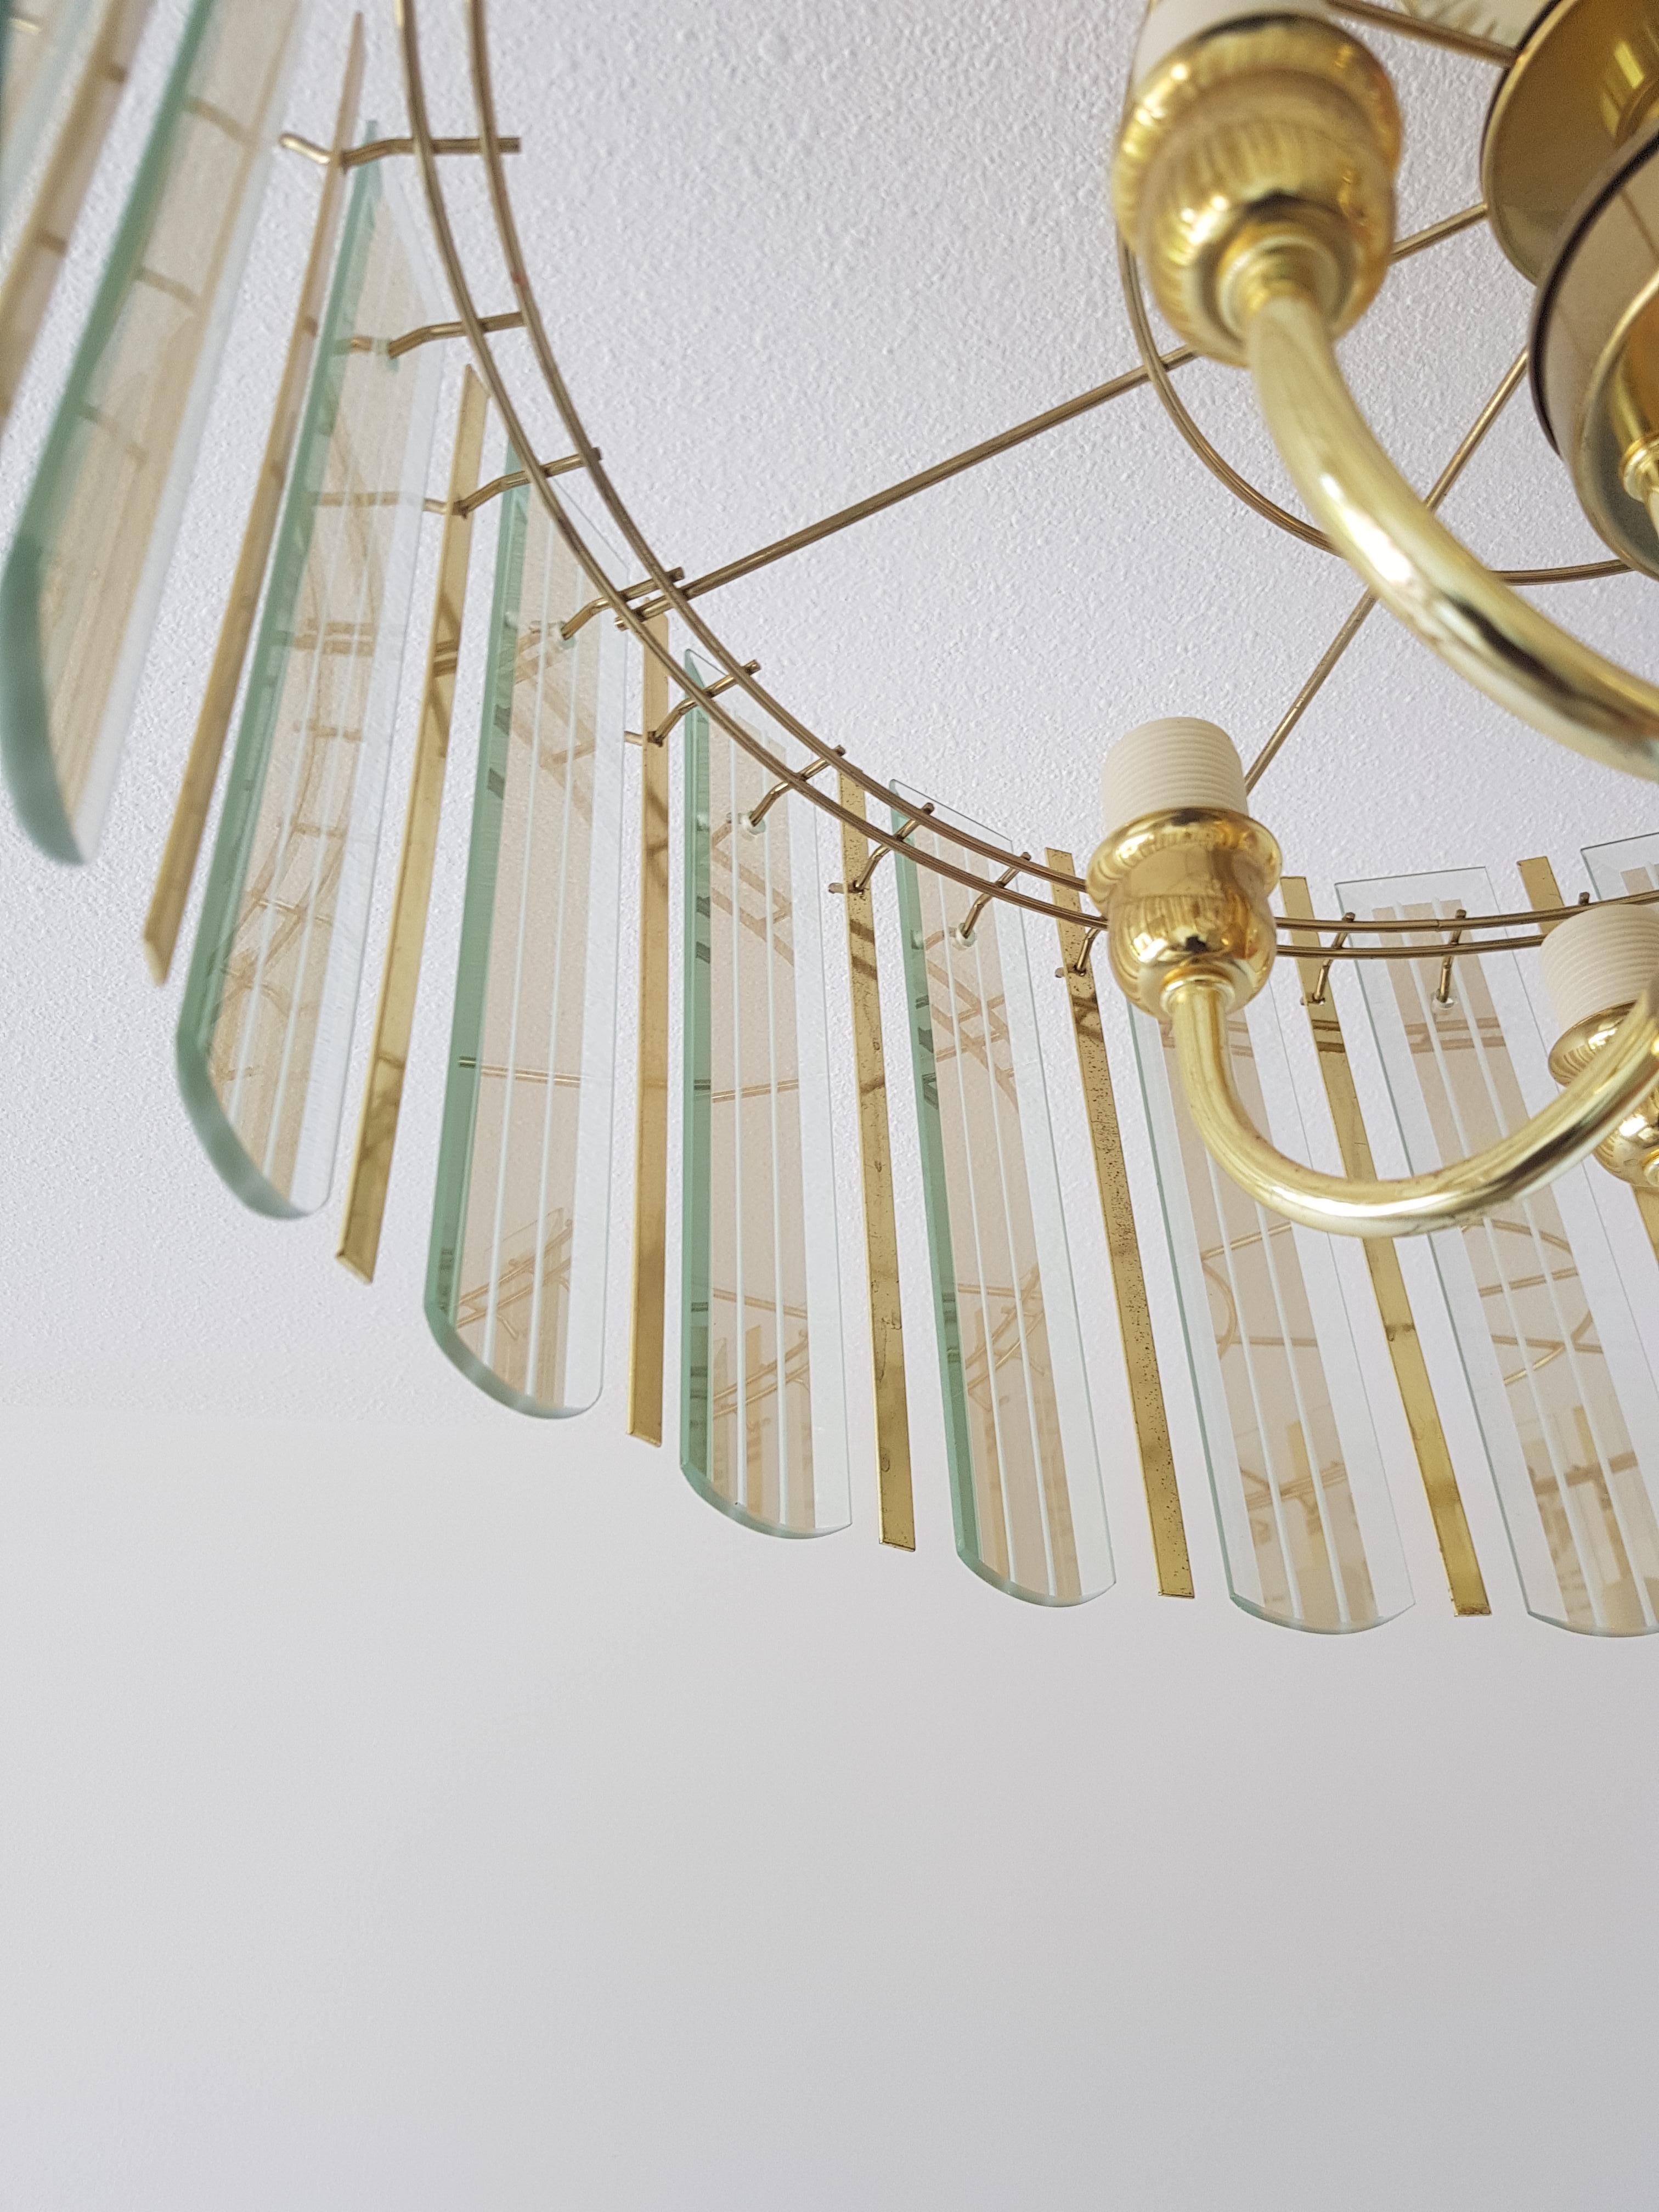 A unique chandelier from the seventies, glass with brass pieces between it and the rectangular glass with mirror finish, this chandelier could be in a James Bond movie.
It has six lamps on top and one big in the middle.
Length can be adjusted by